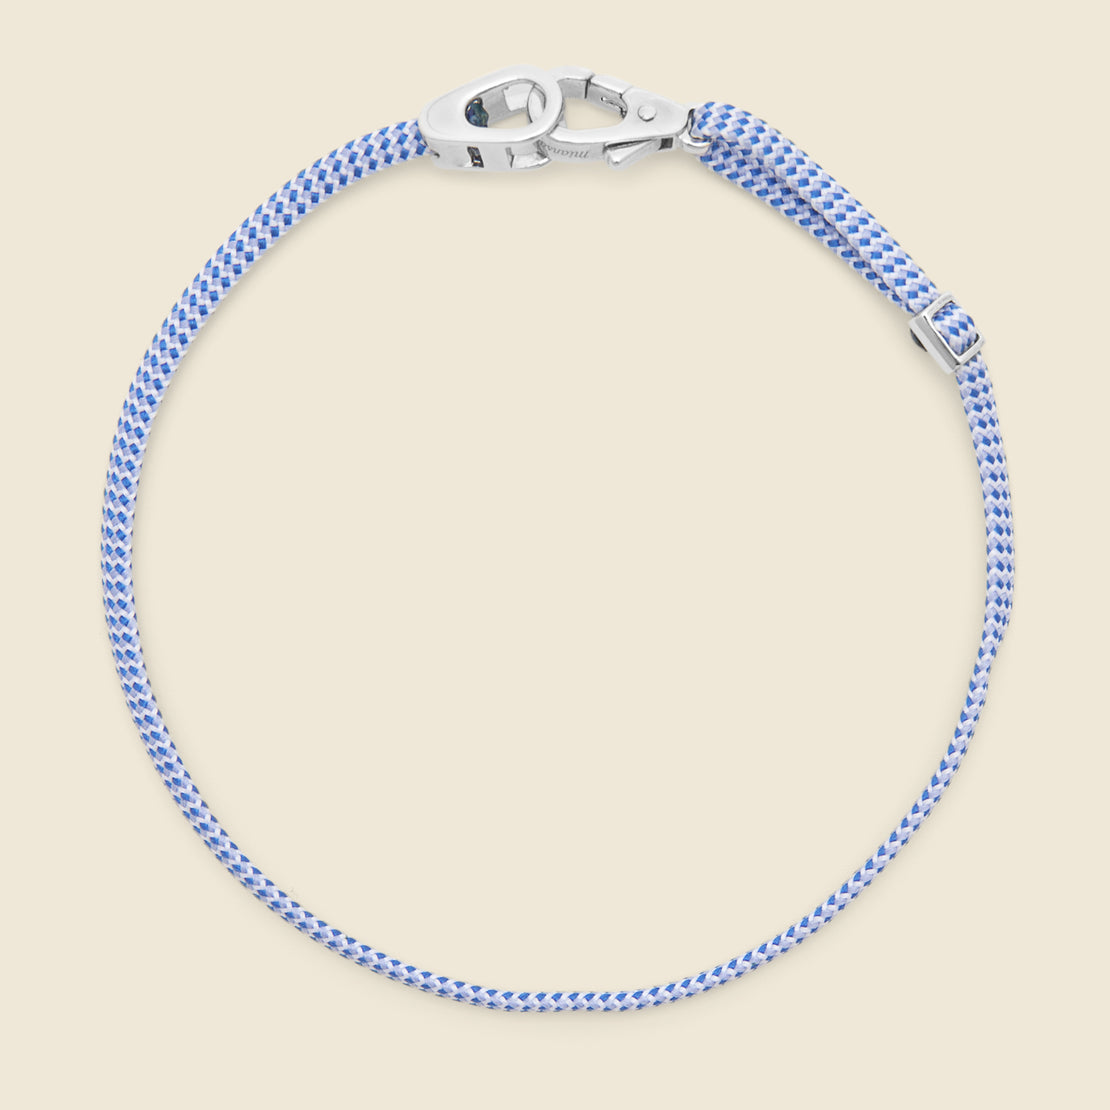 Claw Pull Bracelet - Sterling Silver/Light Blue - Miansai - STAG Provisions - Accessories - Cuffs